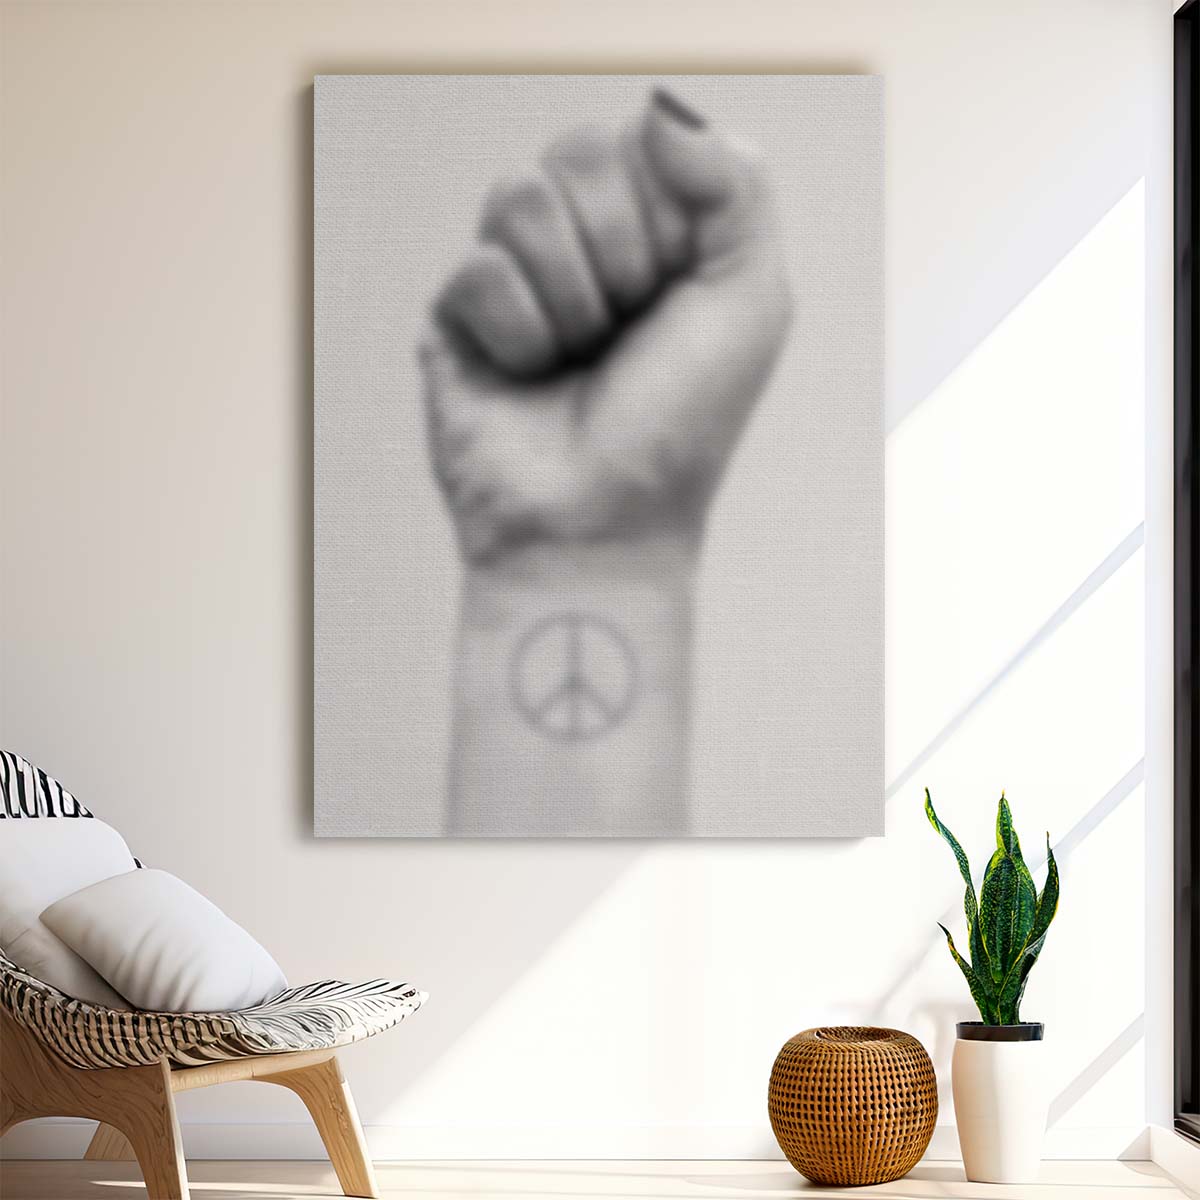 Monochrome Peace Sign Tattoo Illustration - Girl Power, Challenge & Equality by Luxuriance Designs, made in USA